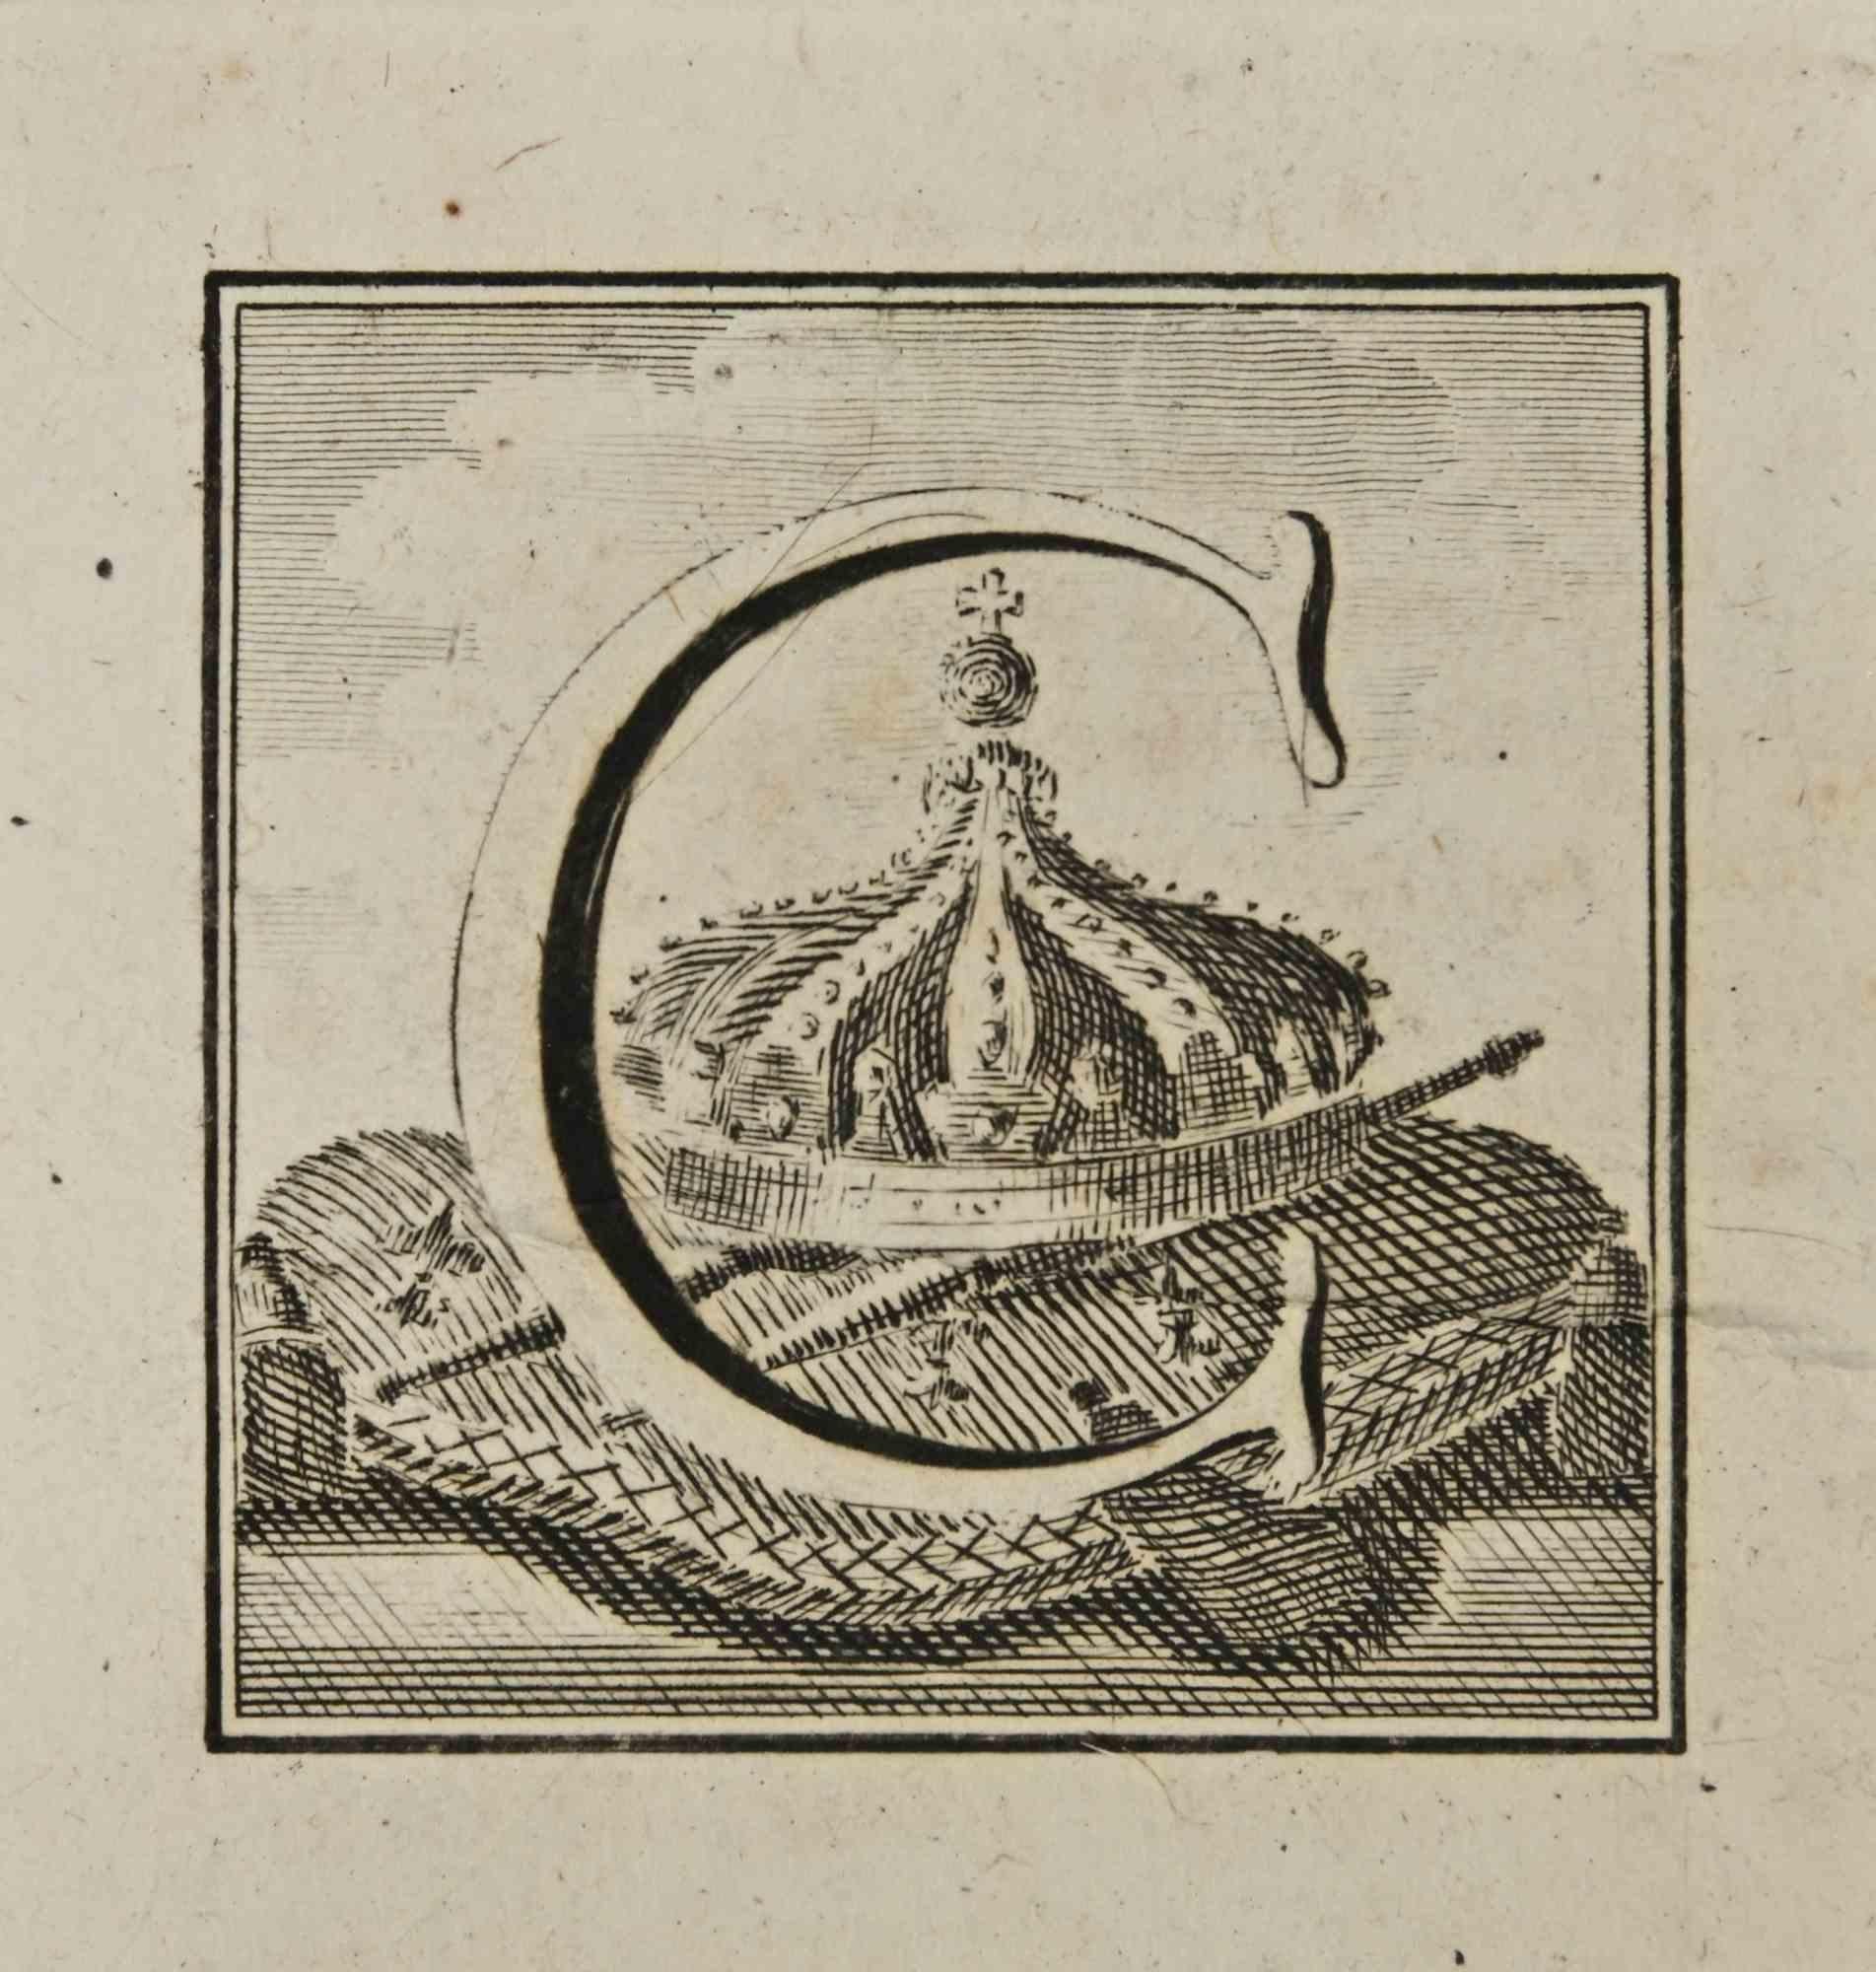 Letter of the Alphabet C,  from the series "Antiquities of Herculaneum", is an etching on paper realized by Luigi Vanvitelli in the 18th century.

Good conditions.

The etching belongs to the print suite “Antiquities of Herculaneum Exposed”